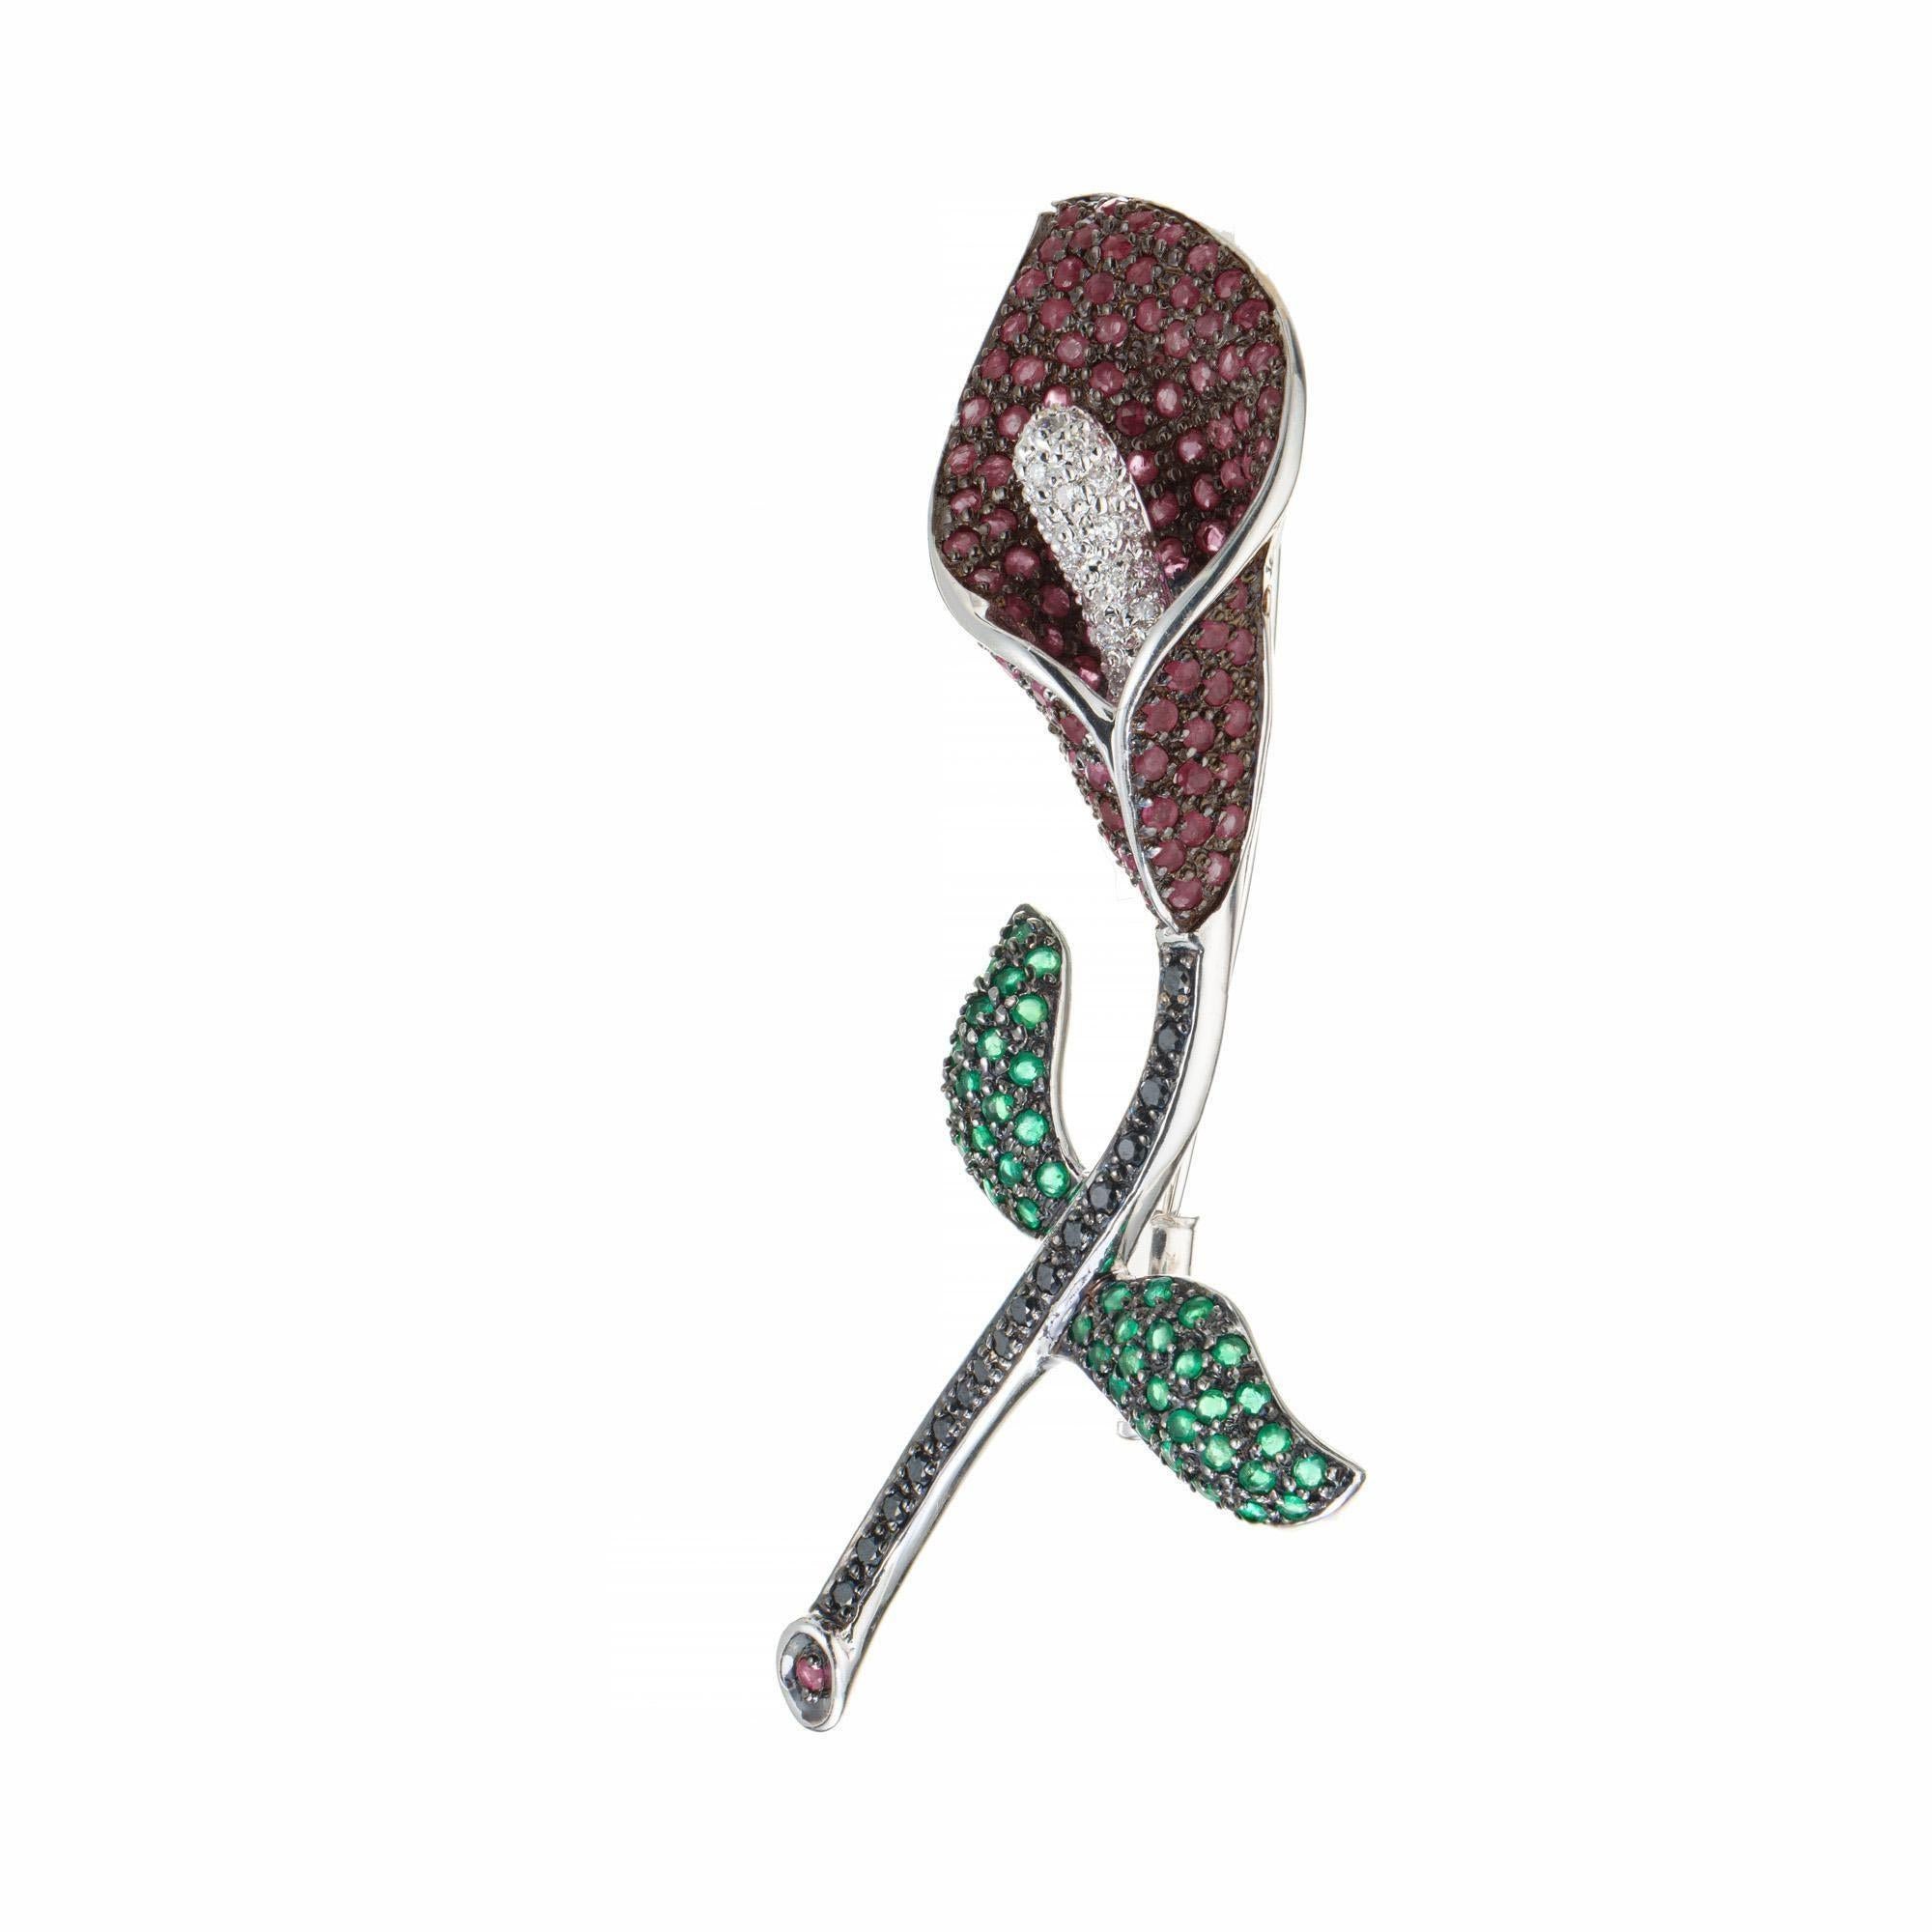 Three dimensional Calla lily pendant and brooch. 109 round red rubies and 29 round diamonds make up the lily with 43 round green emeralds making up the leaves. 16 round black diamonds finish off the stem. This beautiful brooch was created in 18